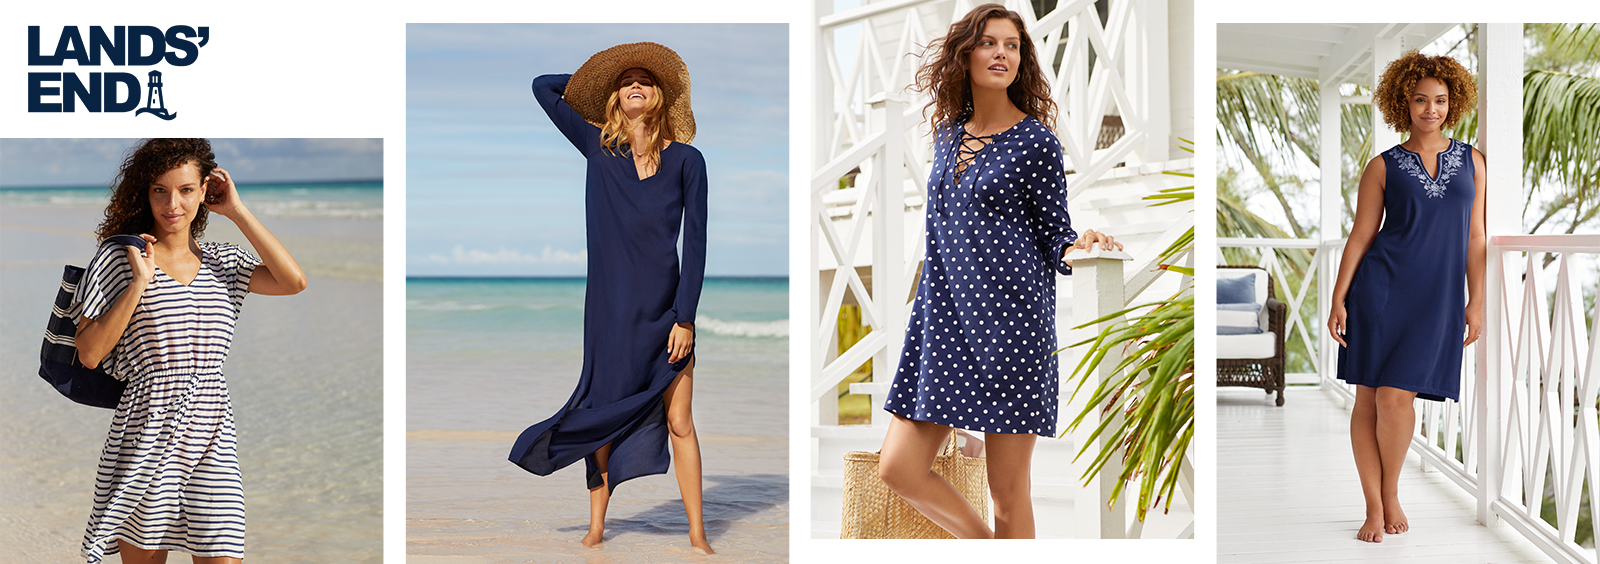 How to Choose the Right Plus-Size Swimsuit Cover-Up for Your Body Type